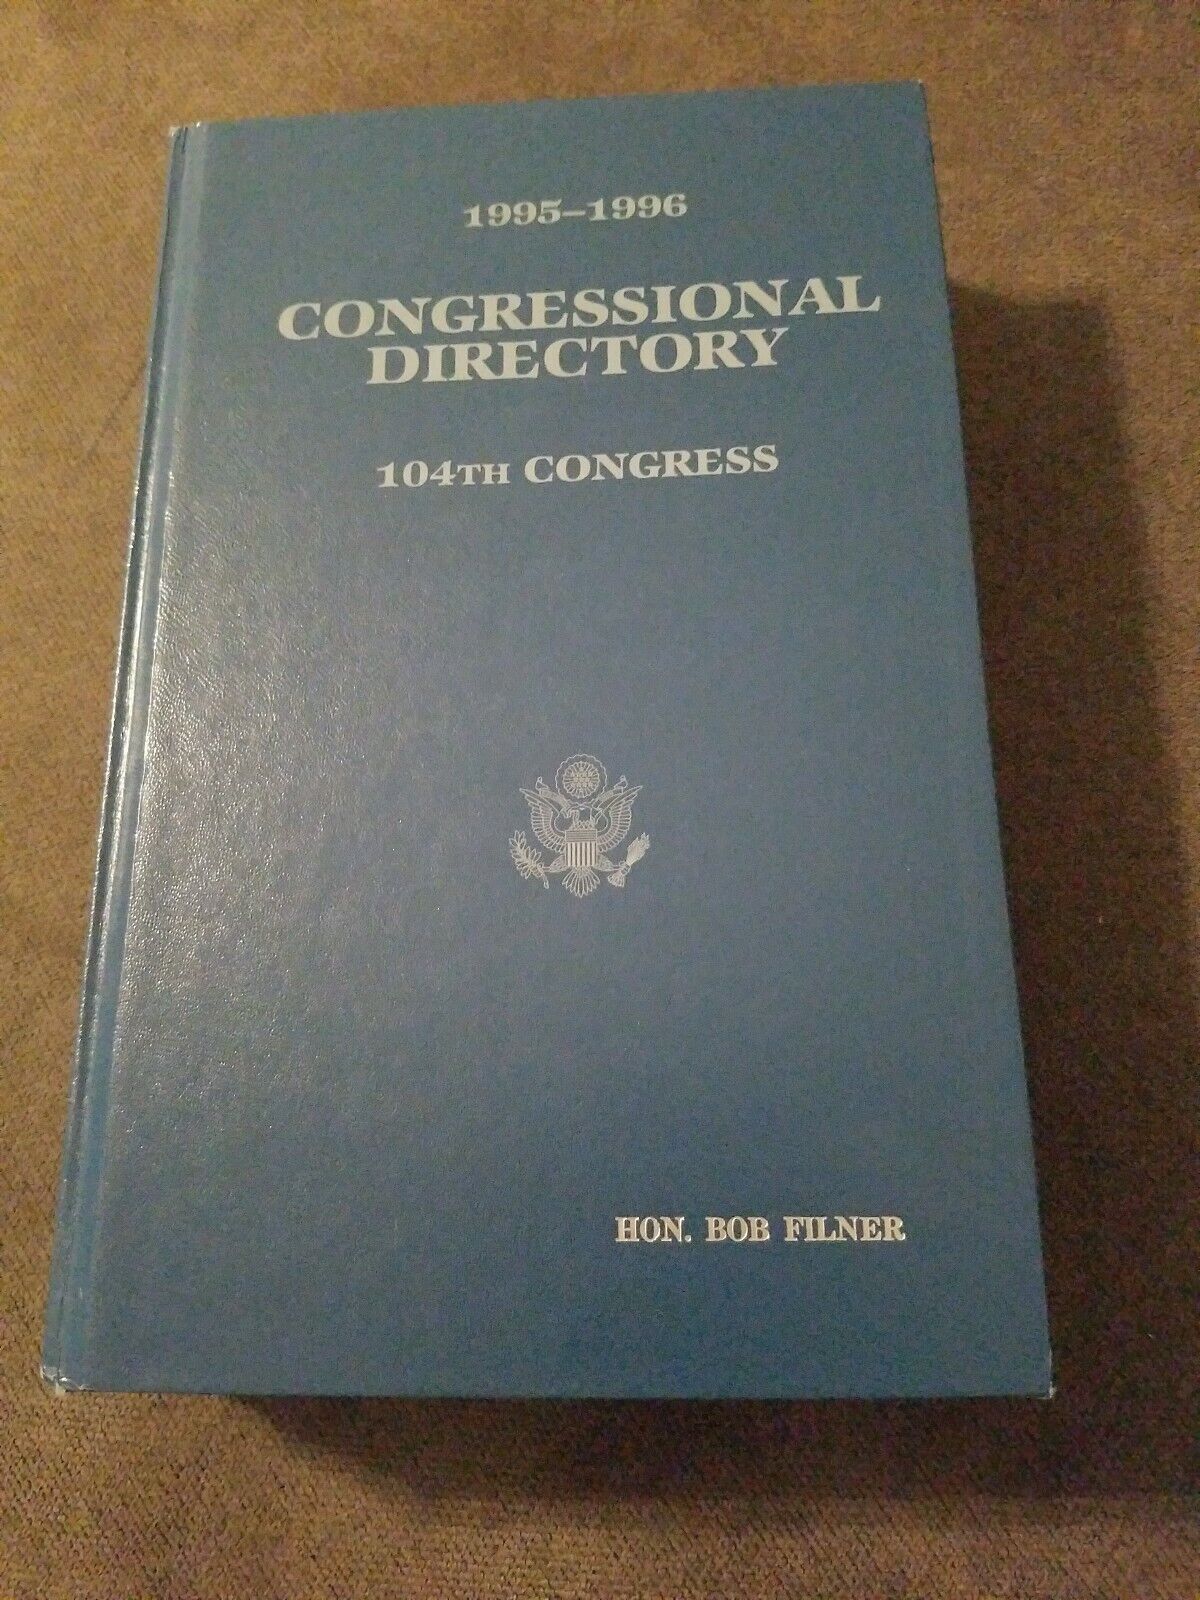 Congressional Directory 104th Congress 1995-1996